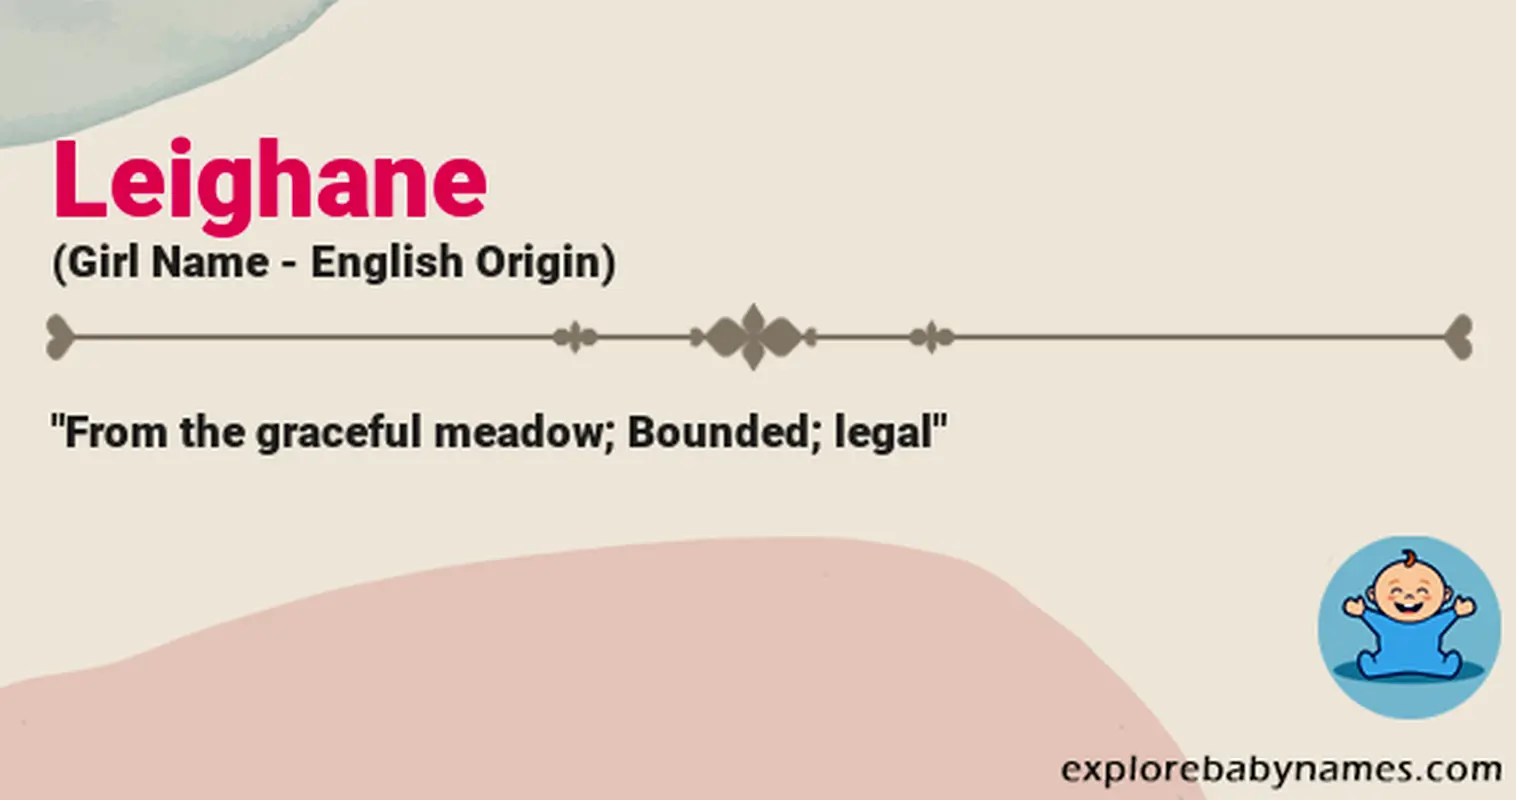 Meaning of Leighane